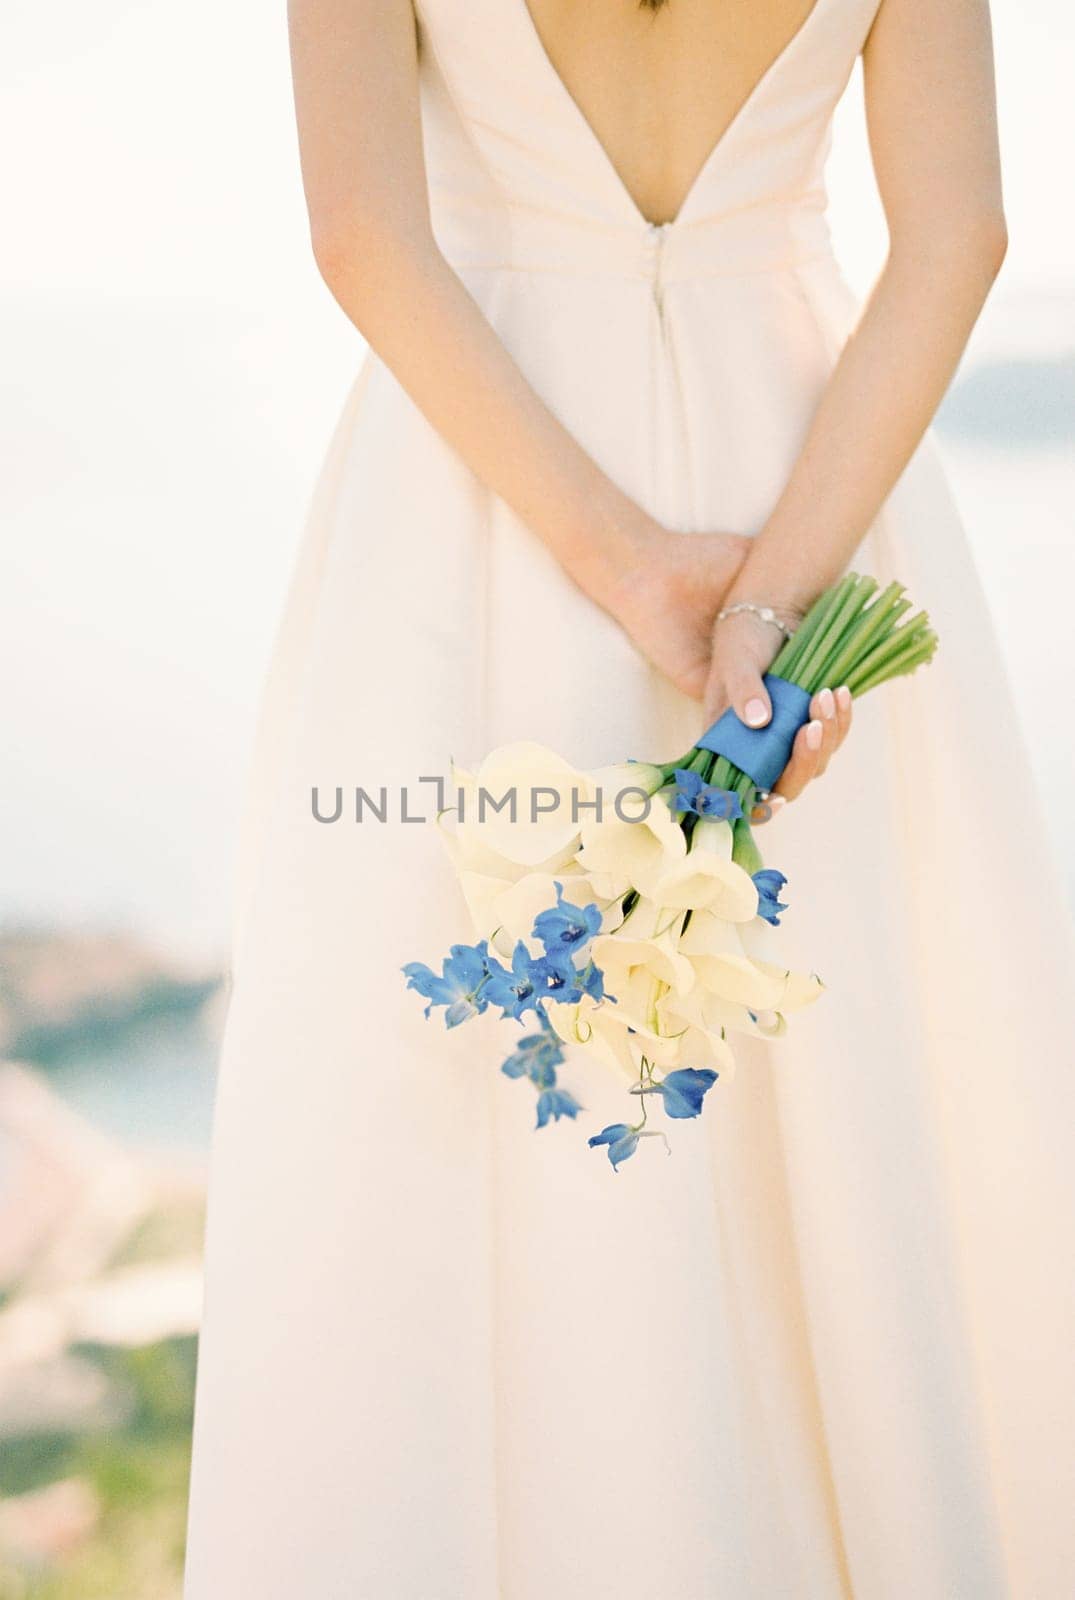 Bride stands with a bouquet of flowers in her hands folded behind her back. Cropped. Back view by Nadtochiy